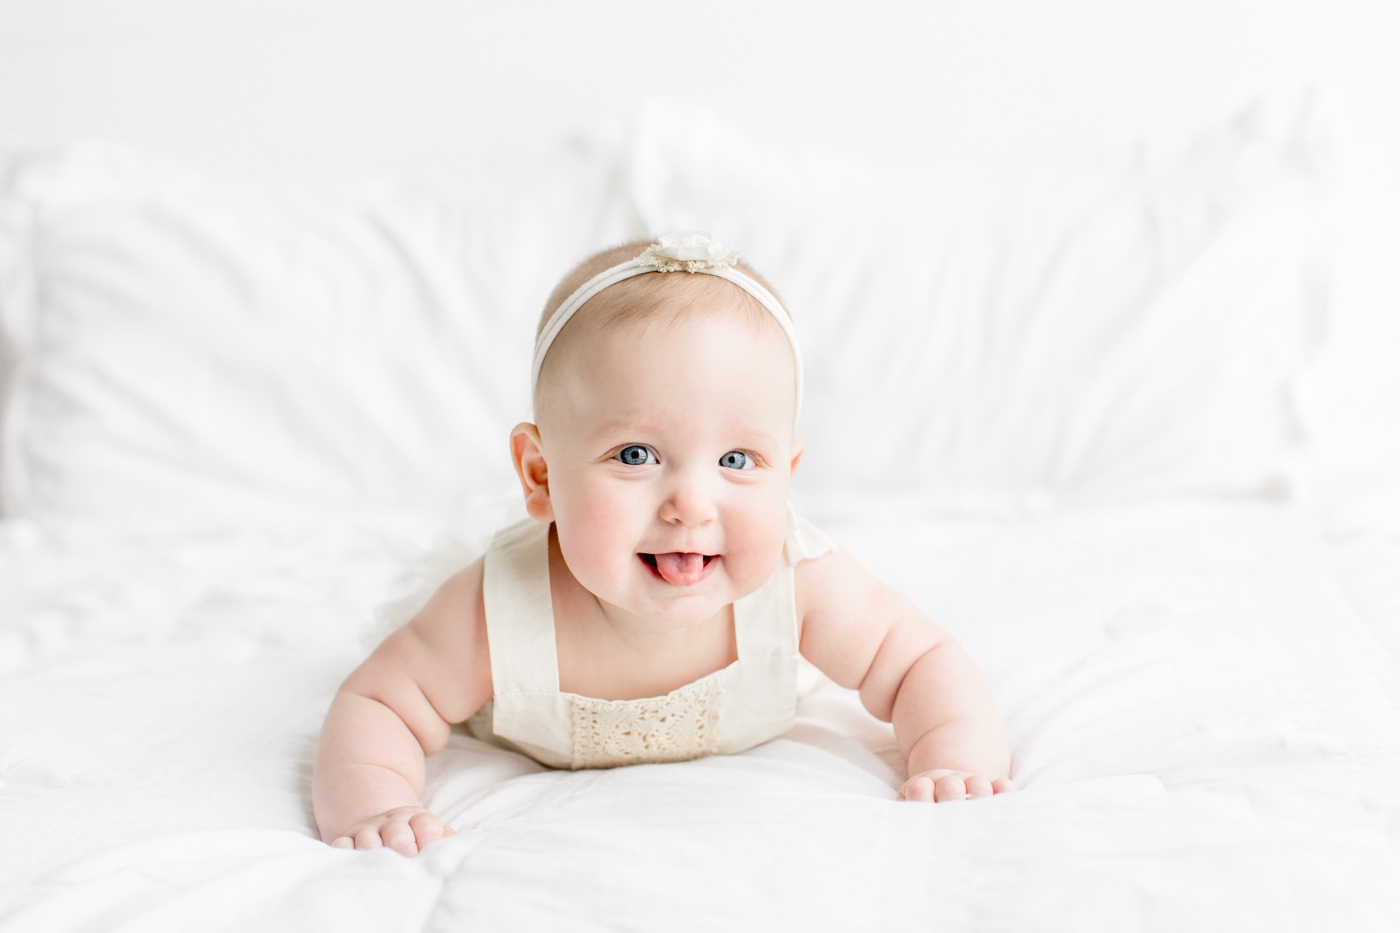 Smiling baby girl with her tongue out during 6 month milestone photos with Sana Ahmed Photography.